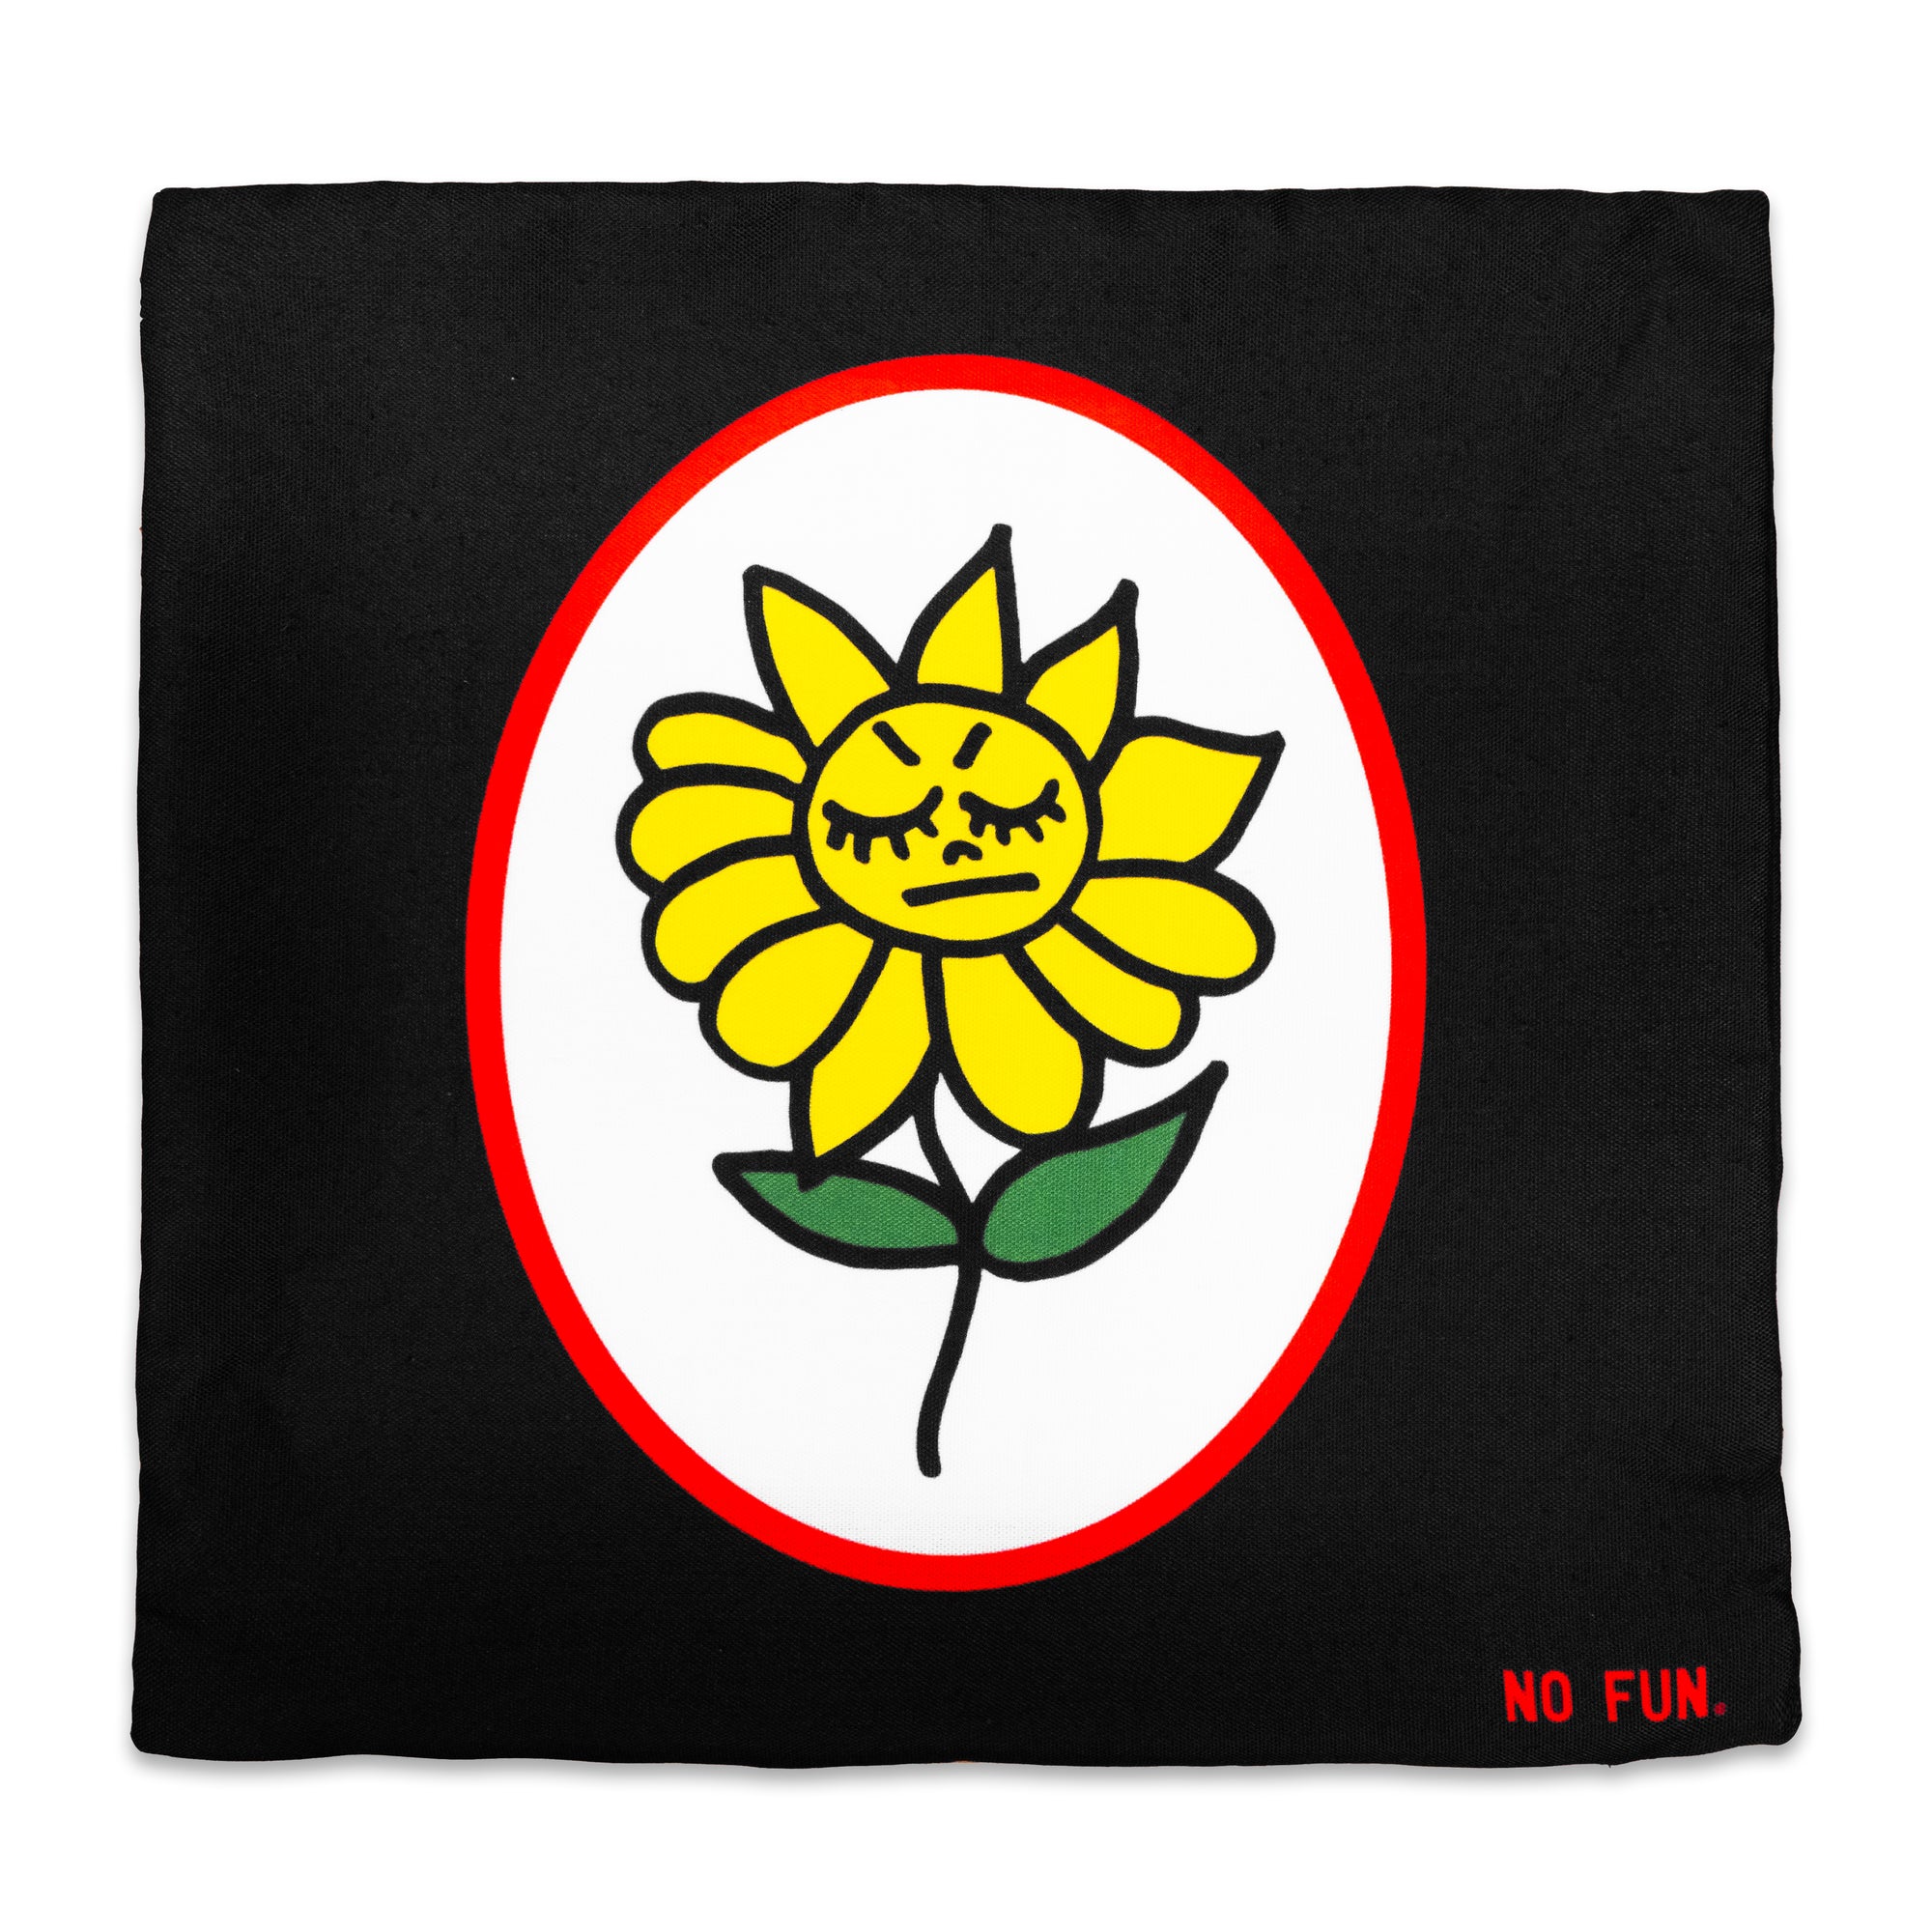 The "Angry Flower & Butterfly" Pillowcase by No Fun®. Pillowcase is black, with a double sided design. This side has a red and white oval, with a yellow cartoon flower in the center. The flower has an angry expression, and two green leaves. There is a small, red, "No Fun®" logo in the bottom right hand corner of the pillowcase.